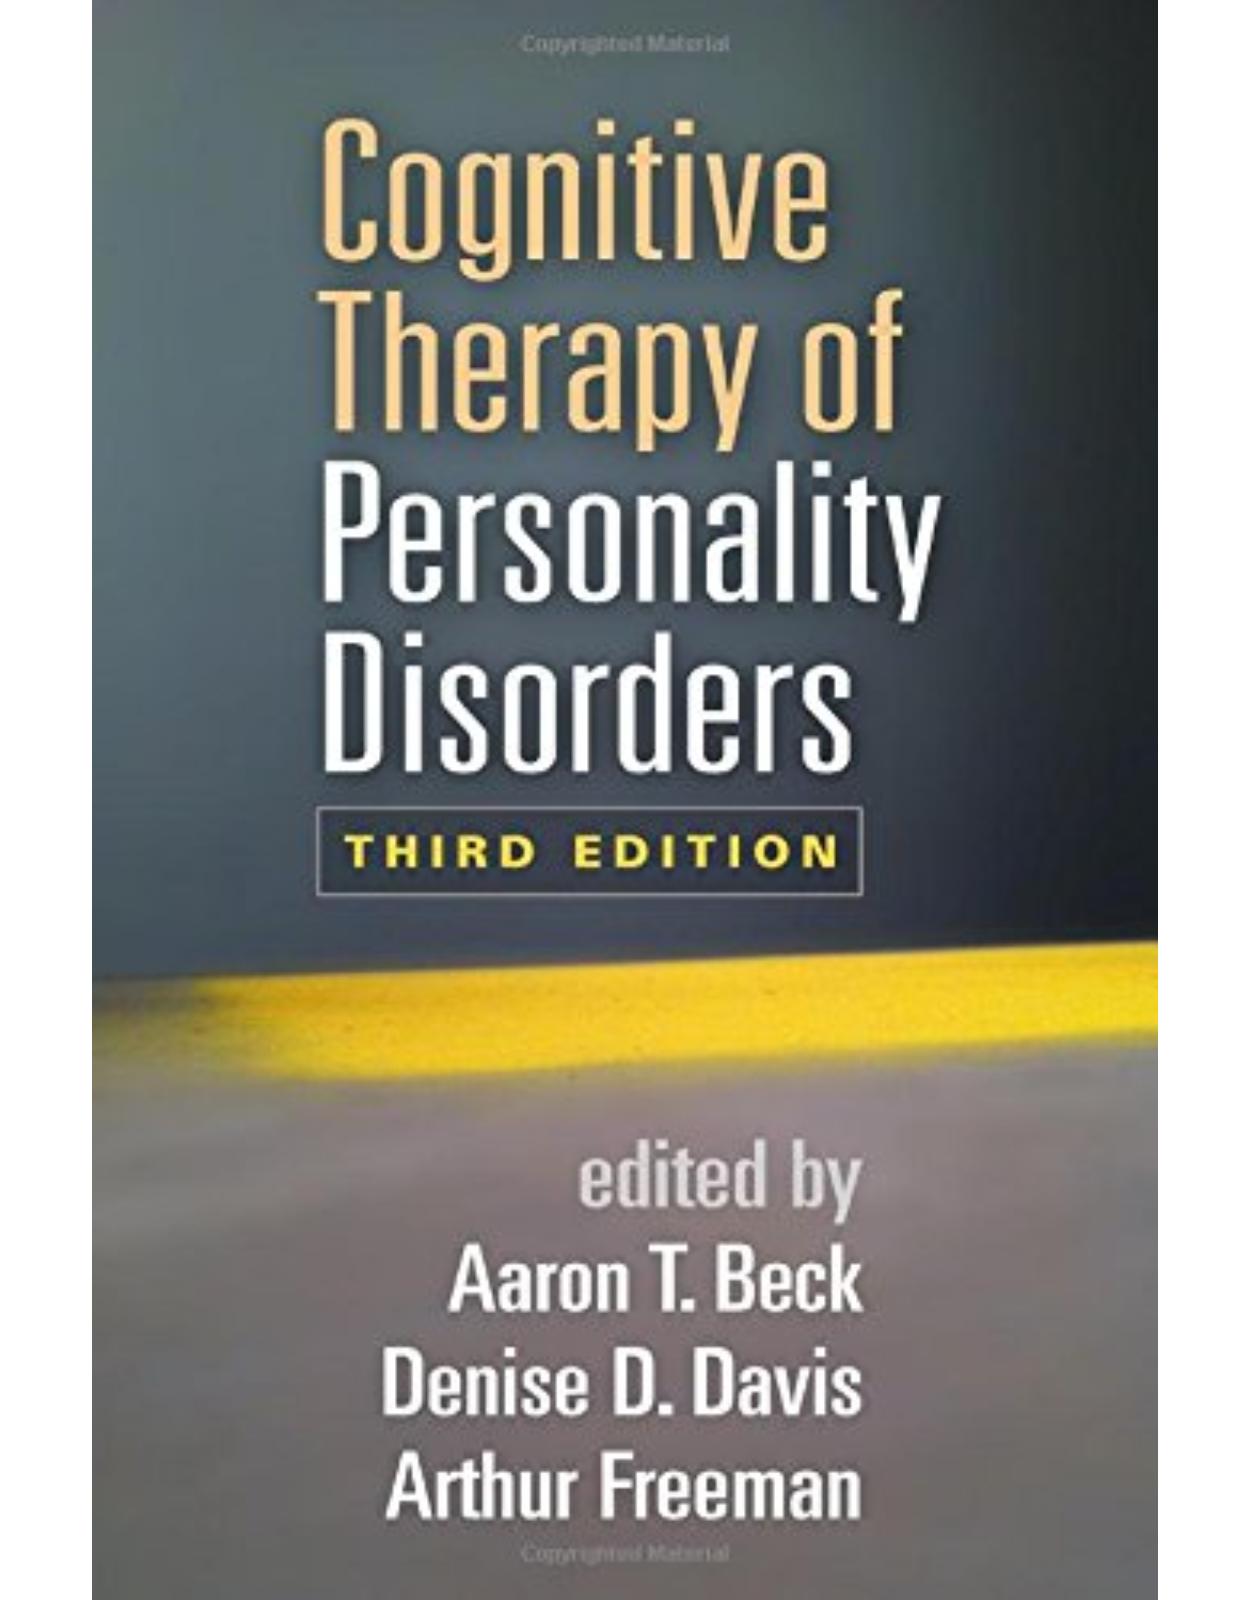 Cognitive Therapy of Personality Disorders, Third Edition 